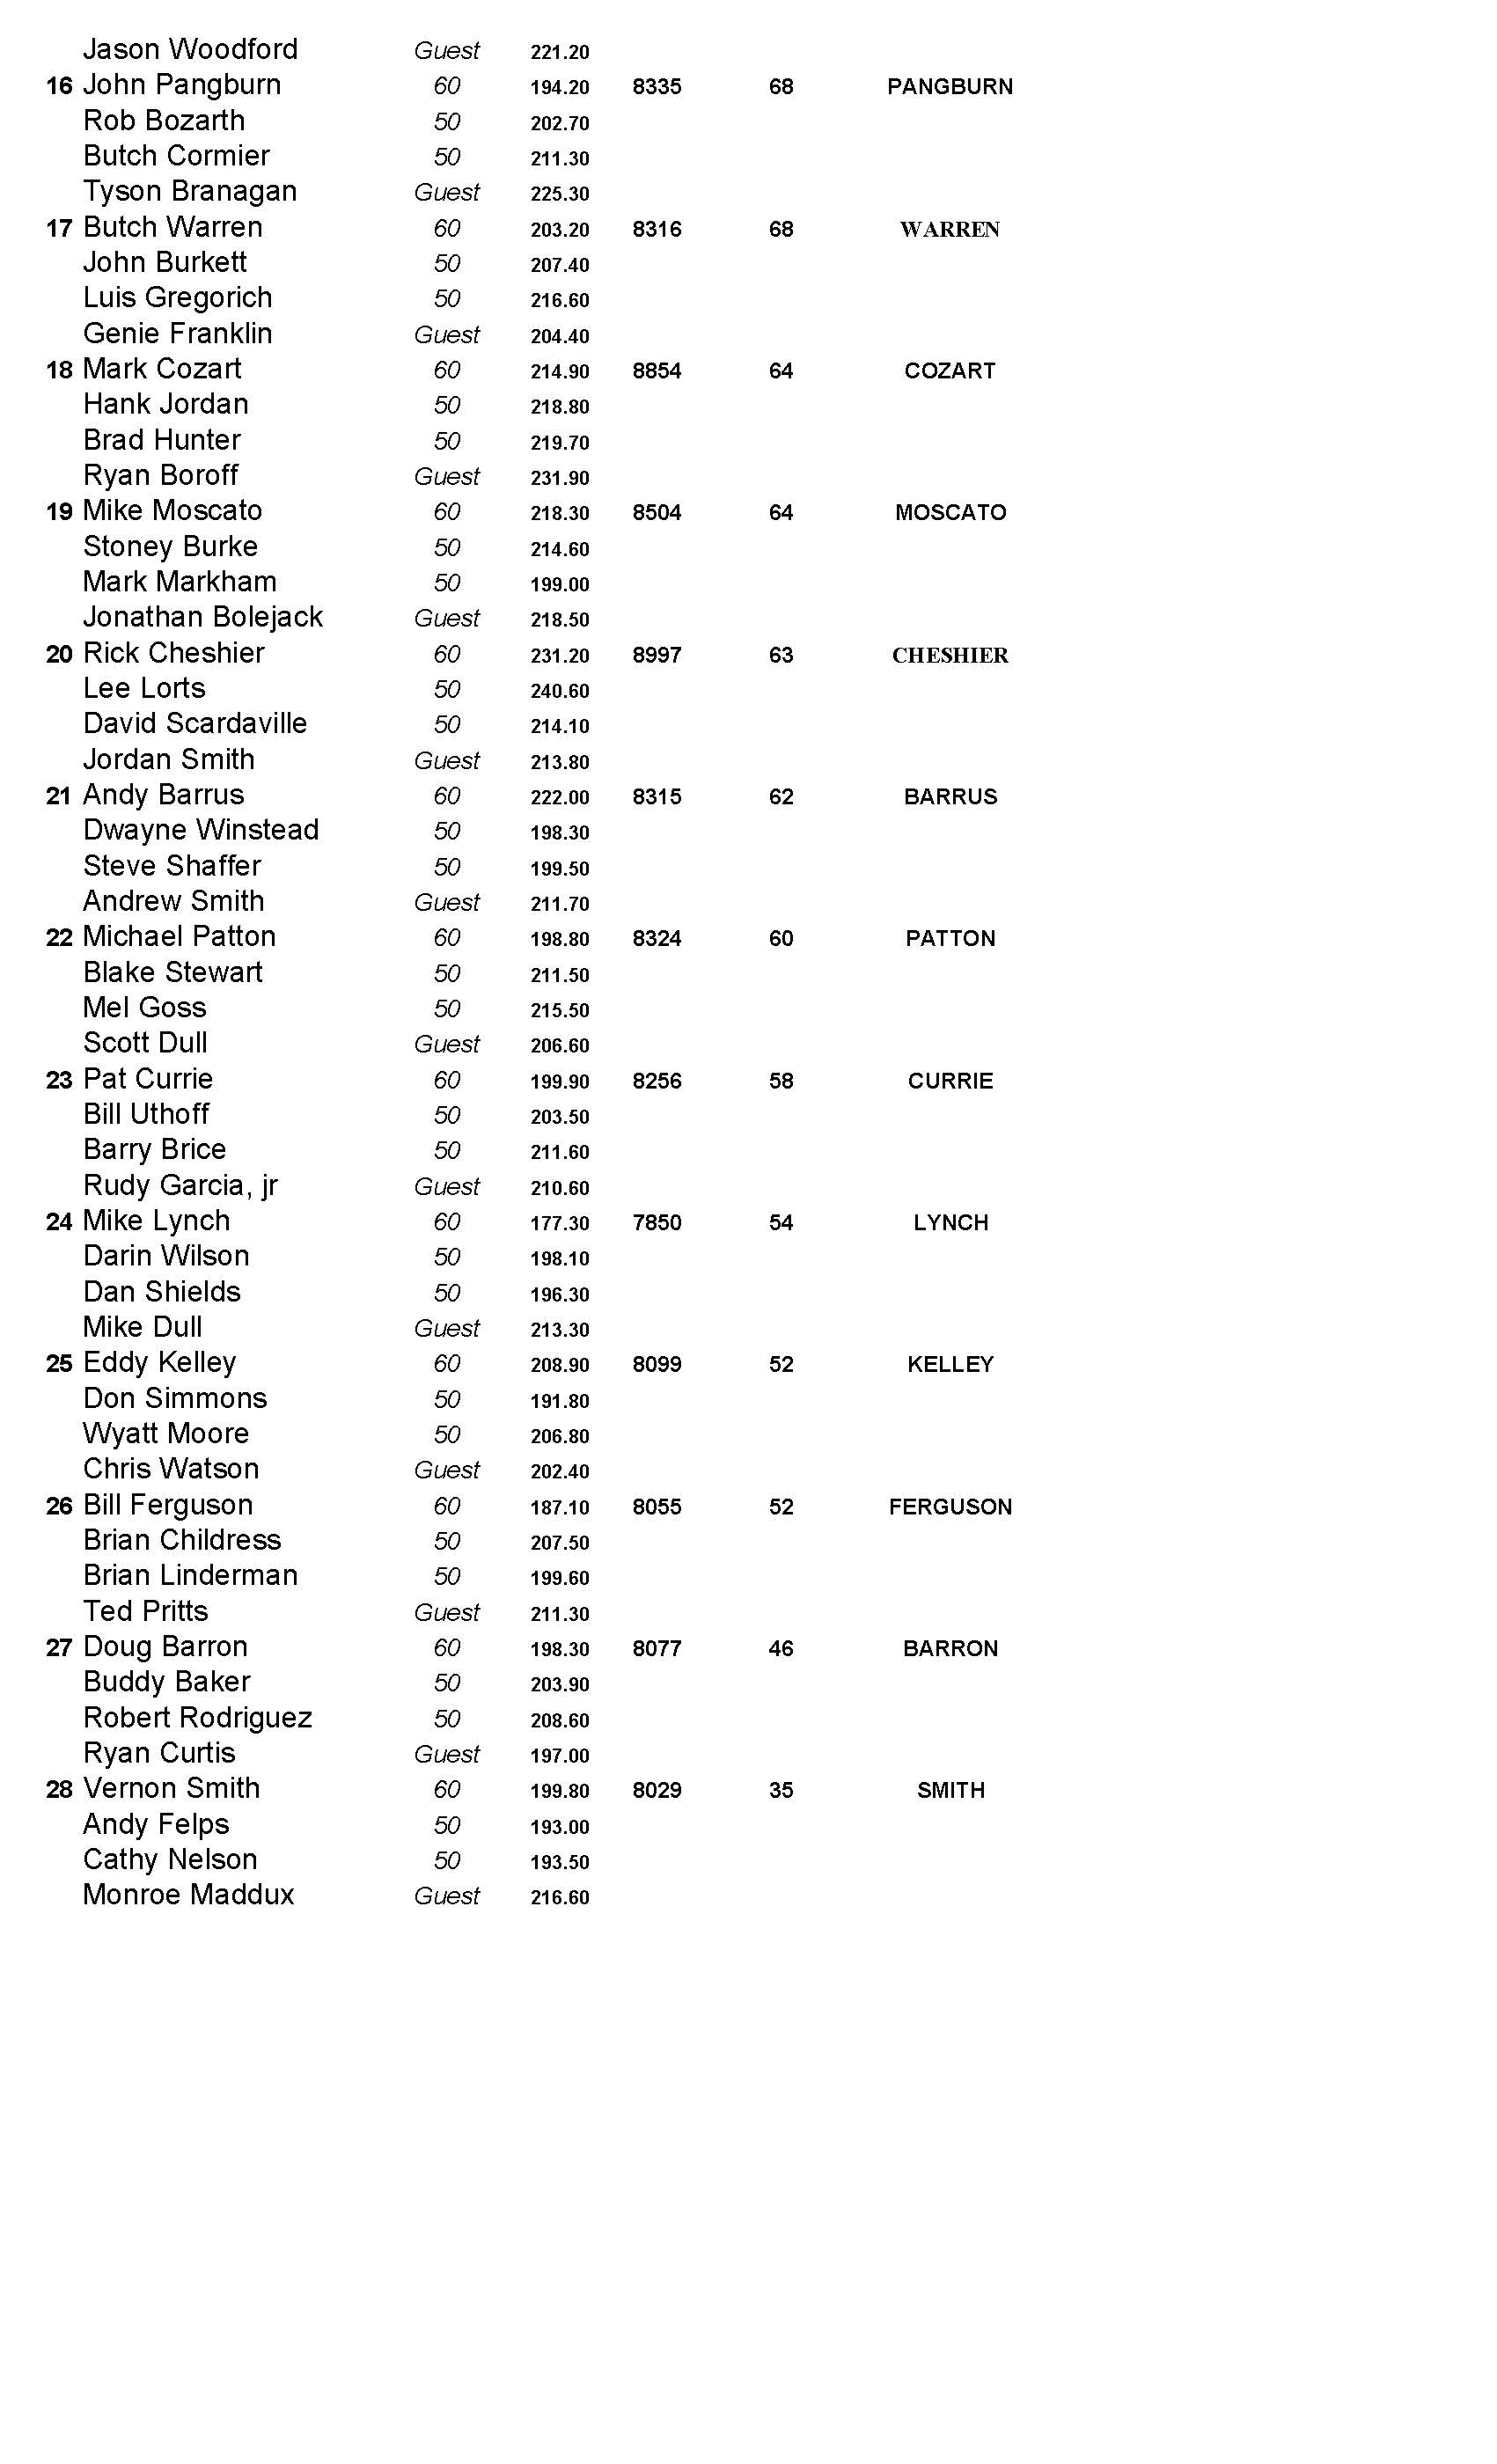 08212022results_Page_2